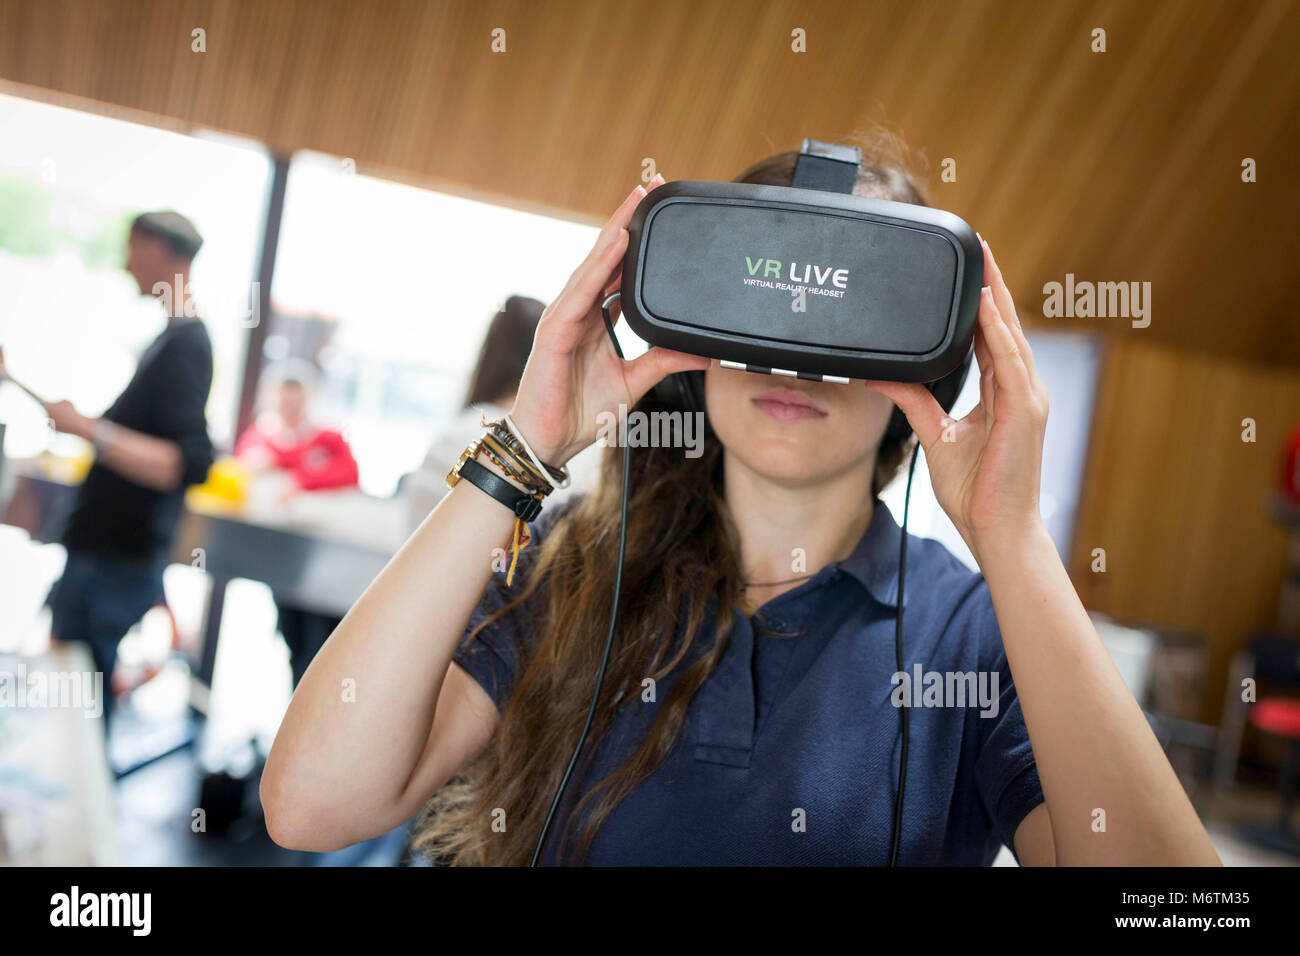 A woman uses a VR headset Stock Photo